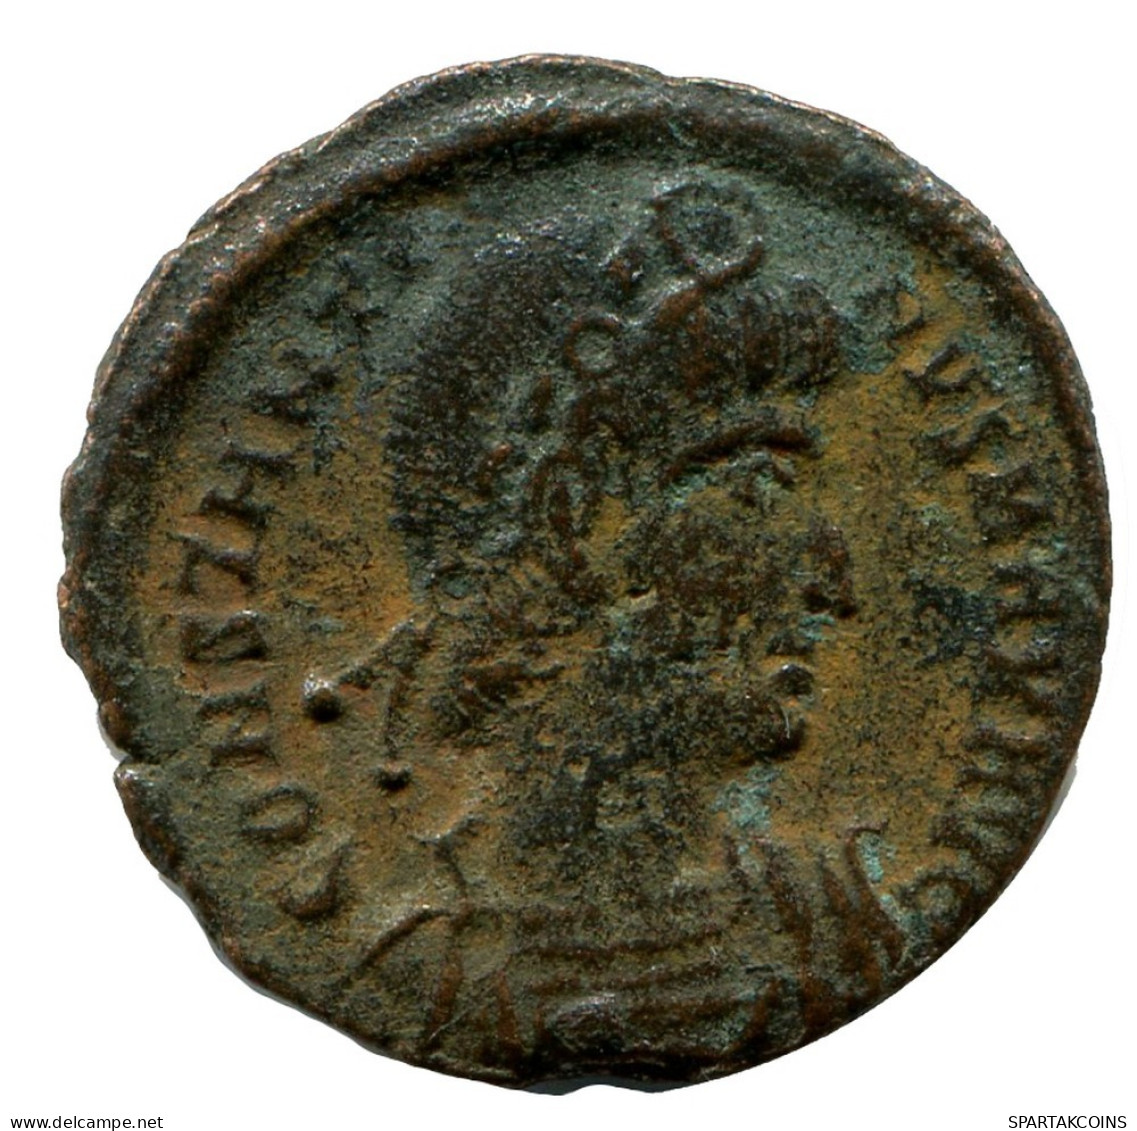 CONSTANTINE I MINTED IN NICOMEDIA FOUND IN IHNASYAH HOARD EGYPT #ANC10862.14.D.A - El Imperio Christiano (307 / 363)